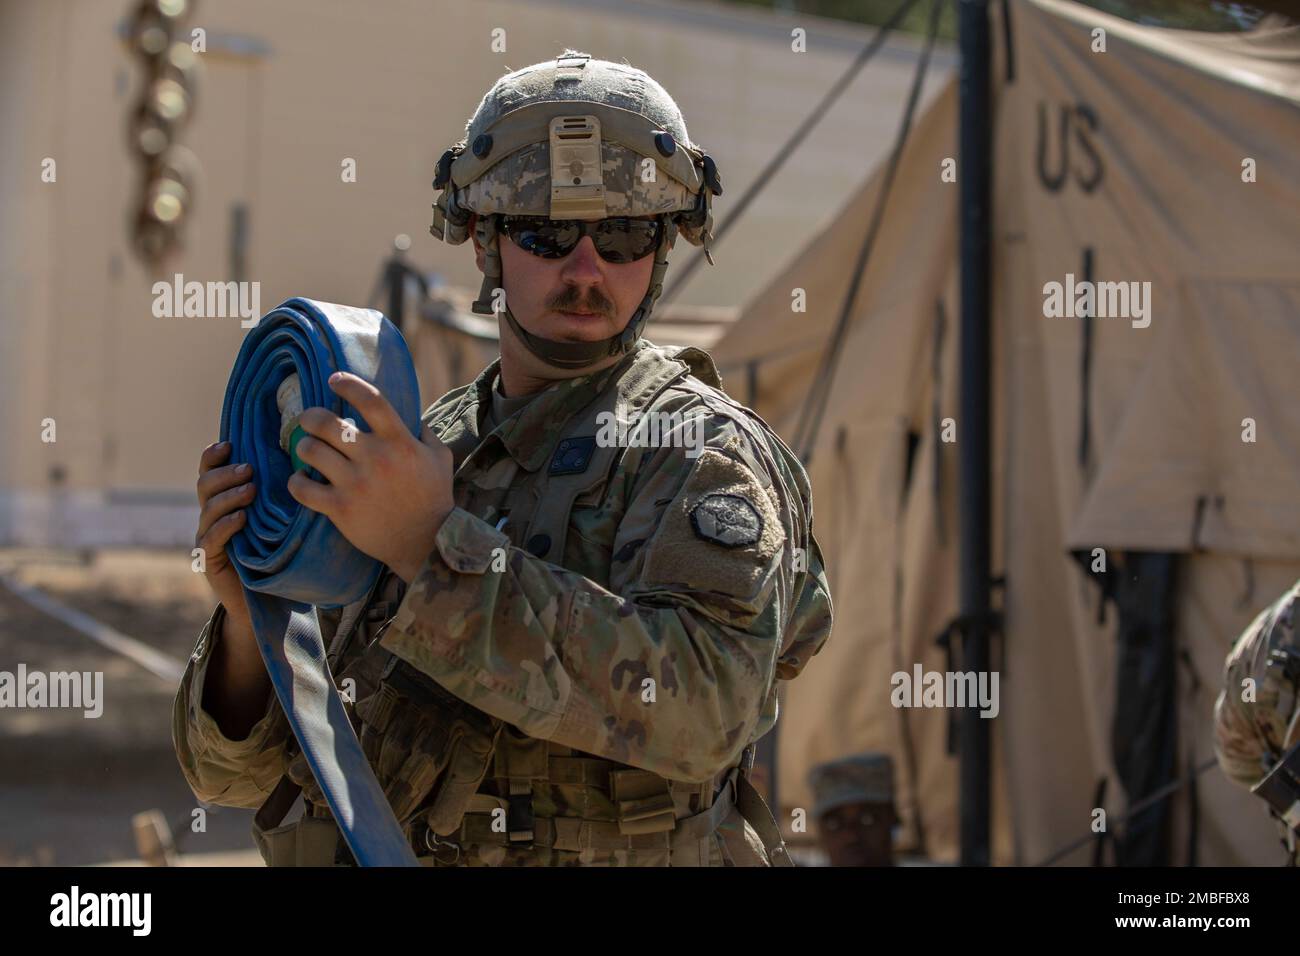 U.S. Army Reserve Spc. Bryan Dakota, a water treatment specialist assigned to the 651st Quartermaster Company based in Casper, Wyoming, rolls up a hose used for transporting water from bags used for a shower tent during Combat Support Training Exercise 91-22-01 at Fort Hunter Liggett, California, June 15. Dakota has been a water treatment specialist in the Army Reserves for over six years and also works as a civilian crane operator. Stock Photo